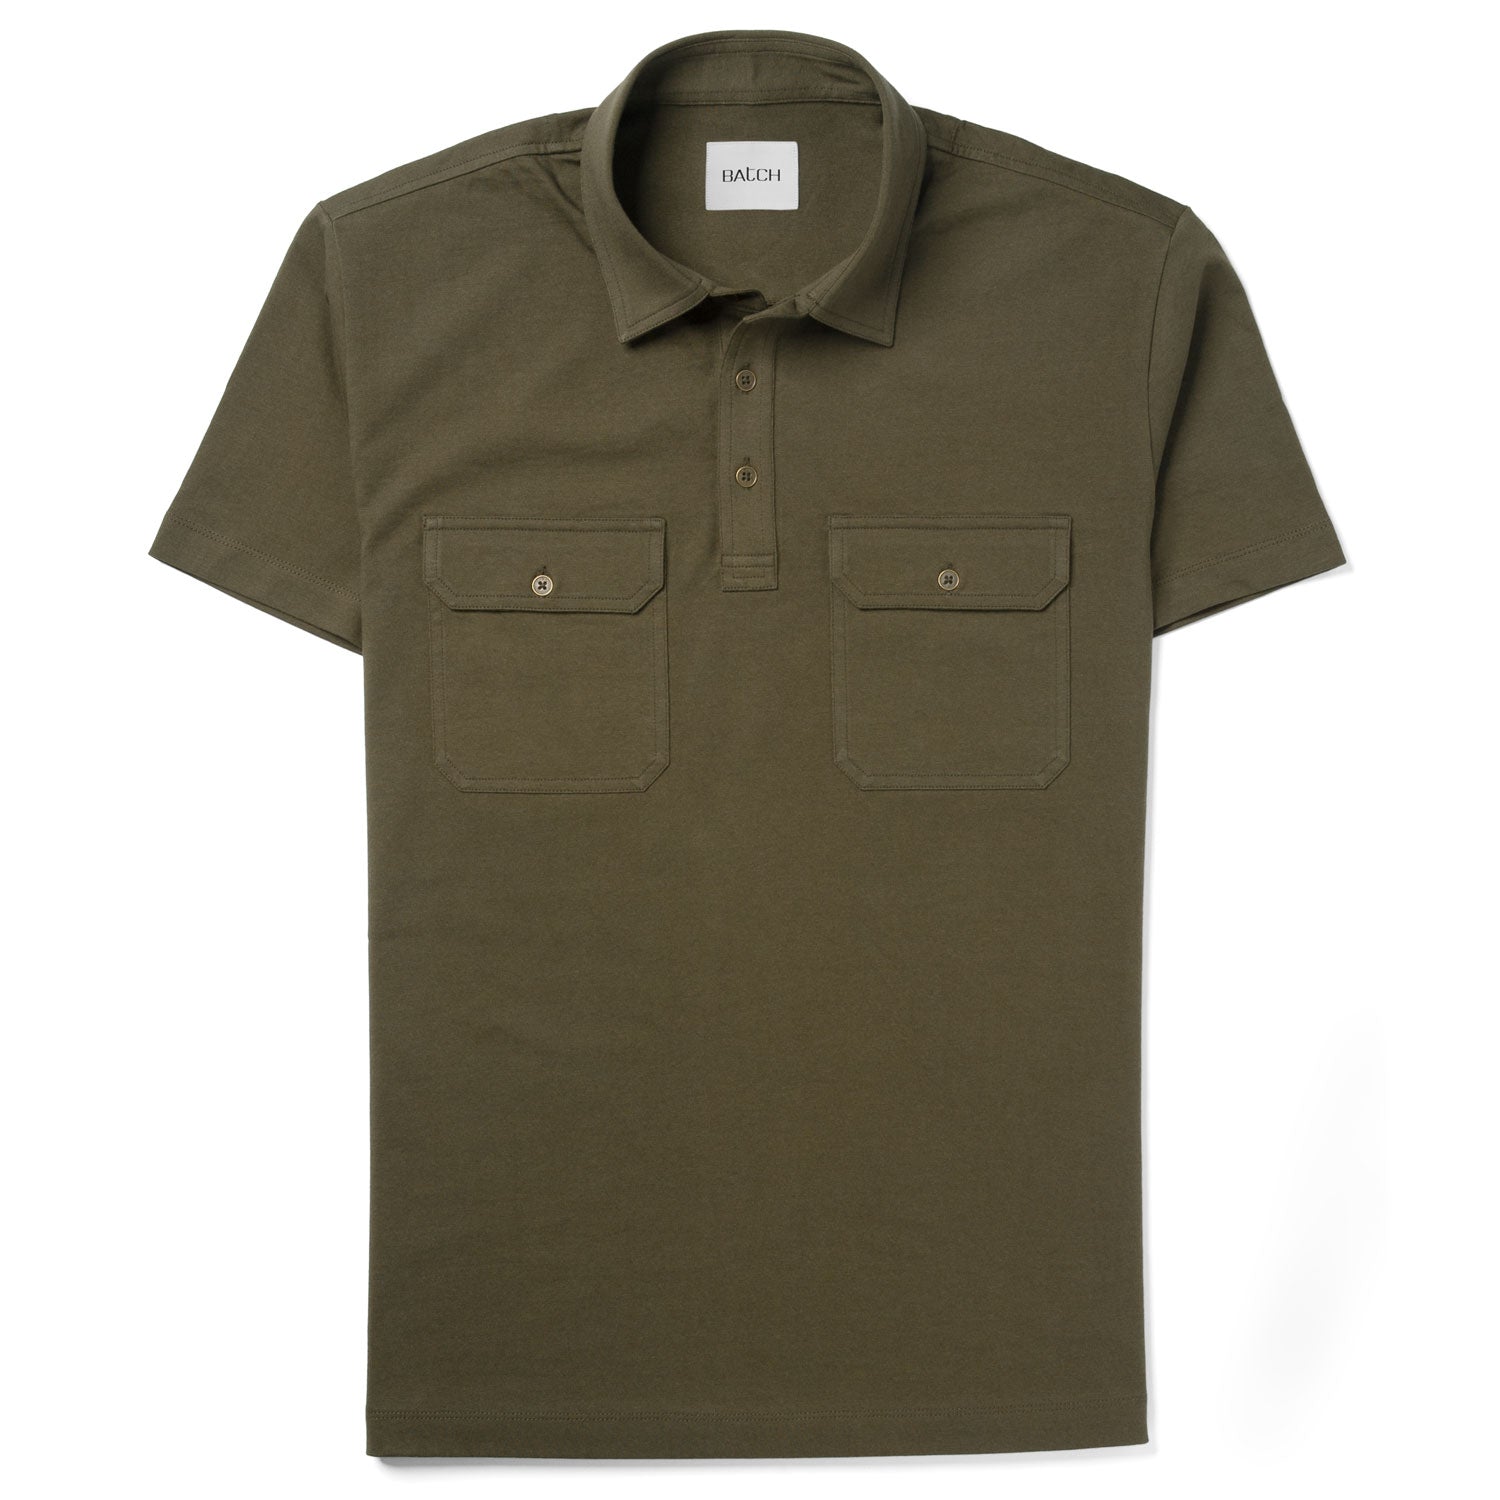 Constructor Short Sleeve Polo Shirt –  Olive Green Cotton Jersey